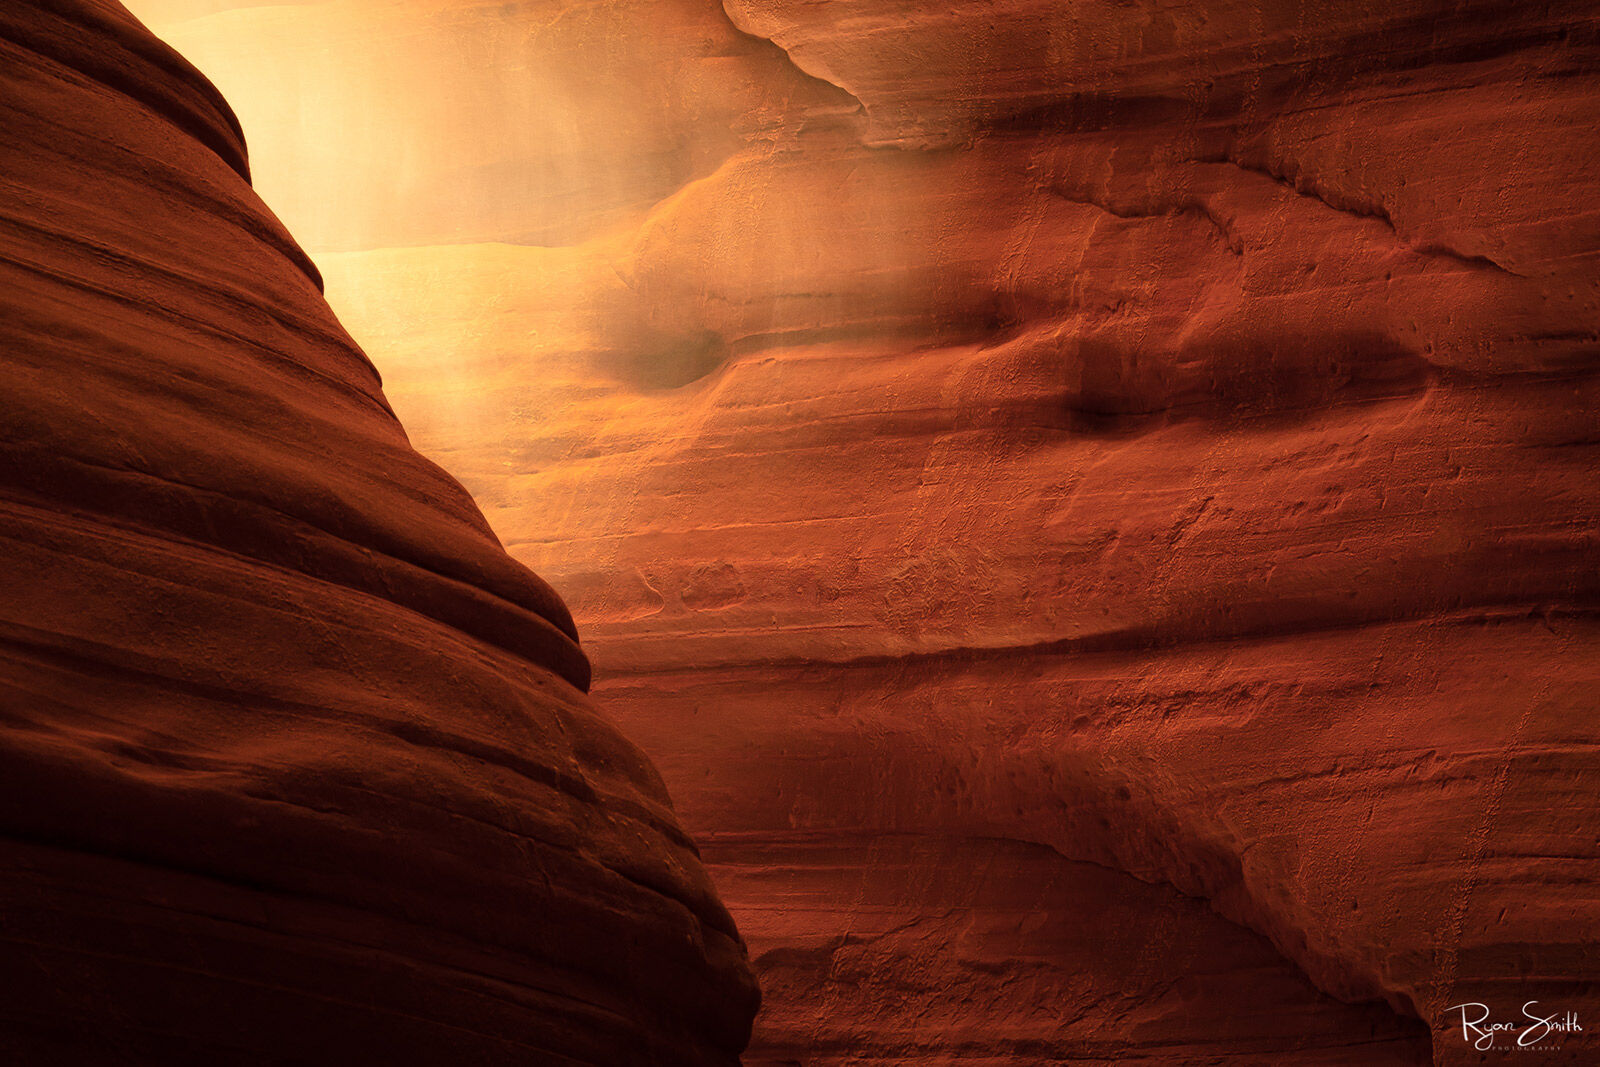 Inside a canyon, close to the orange-lit sandstone walls, the light shines in.